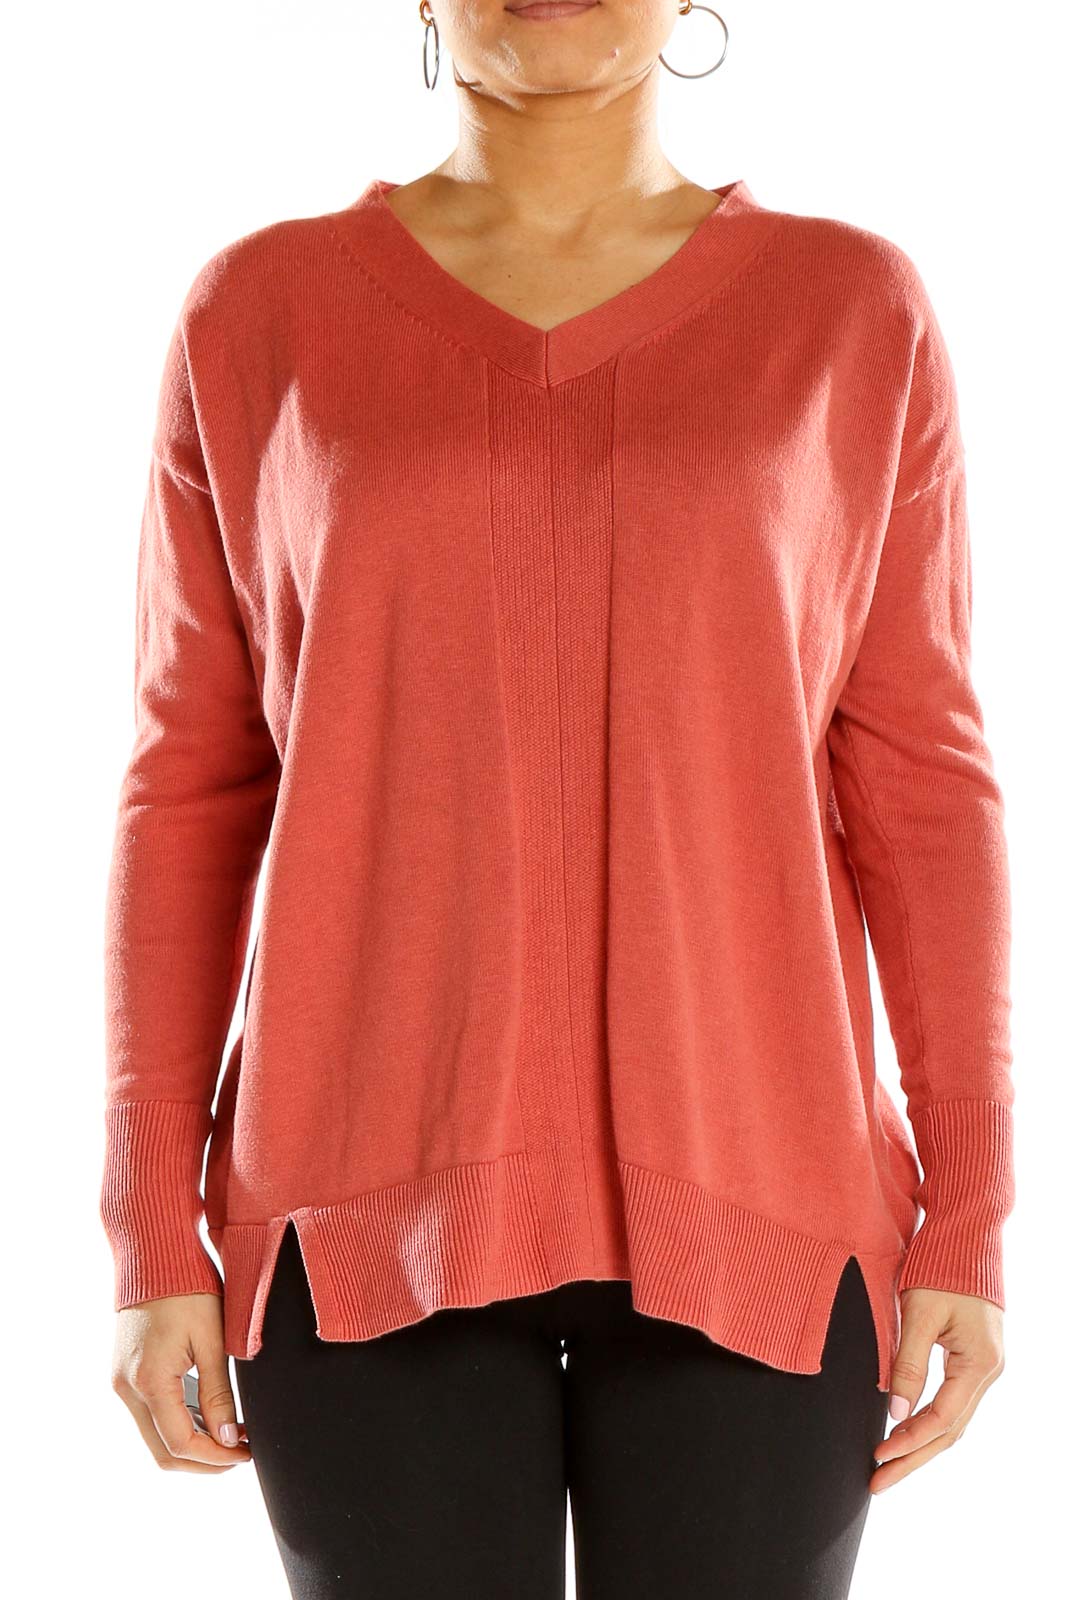 Red Classic Top Front